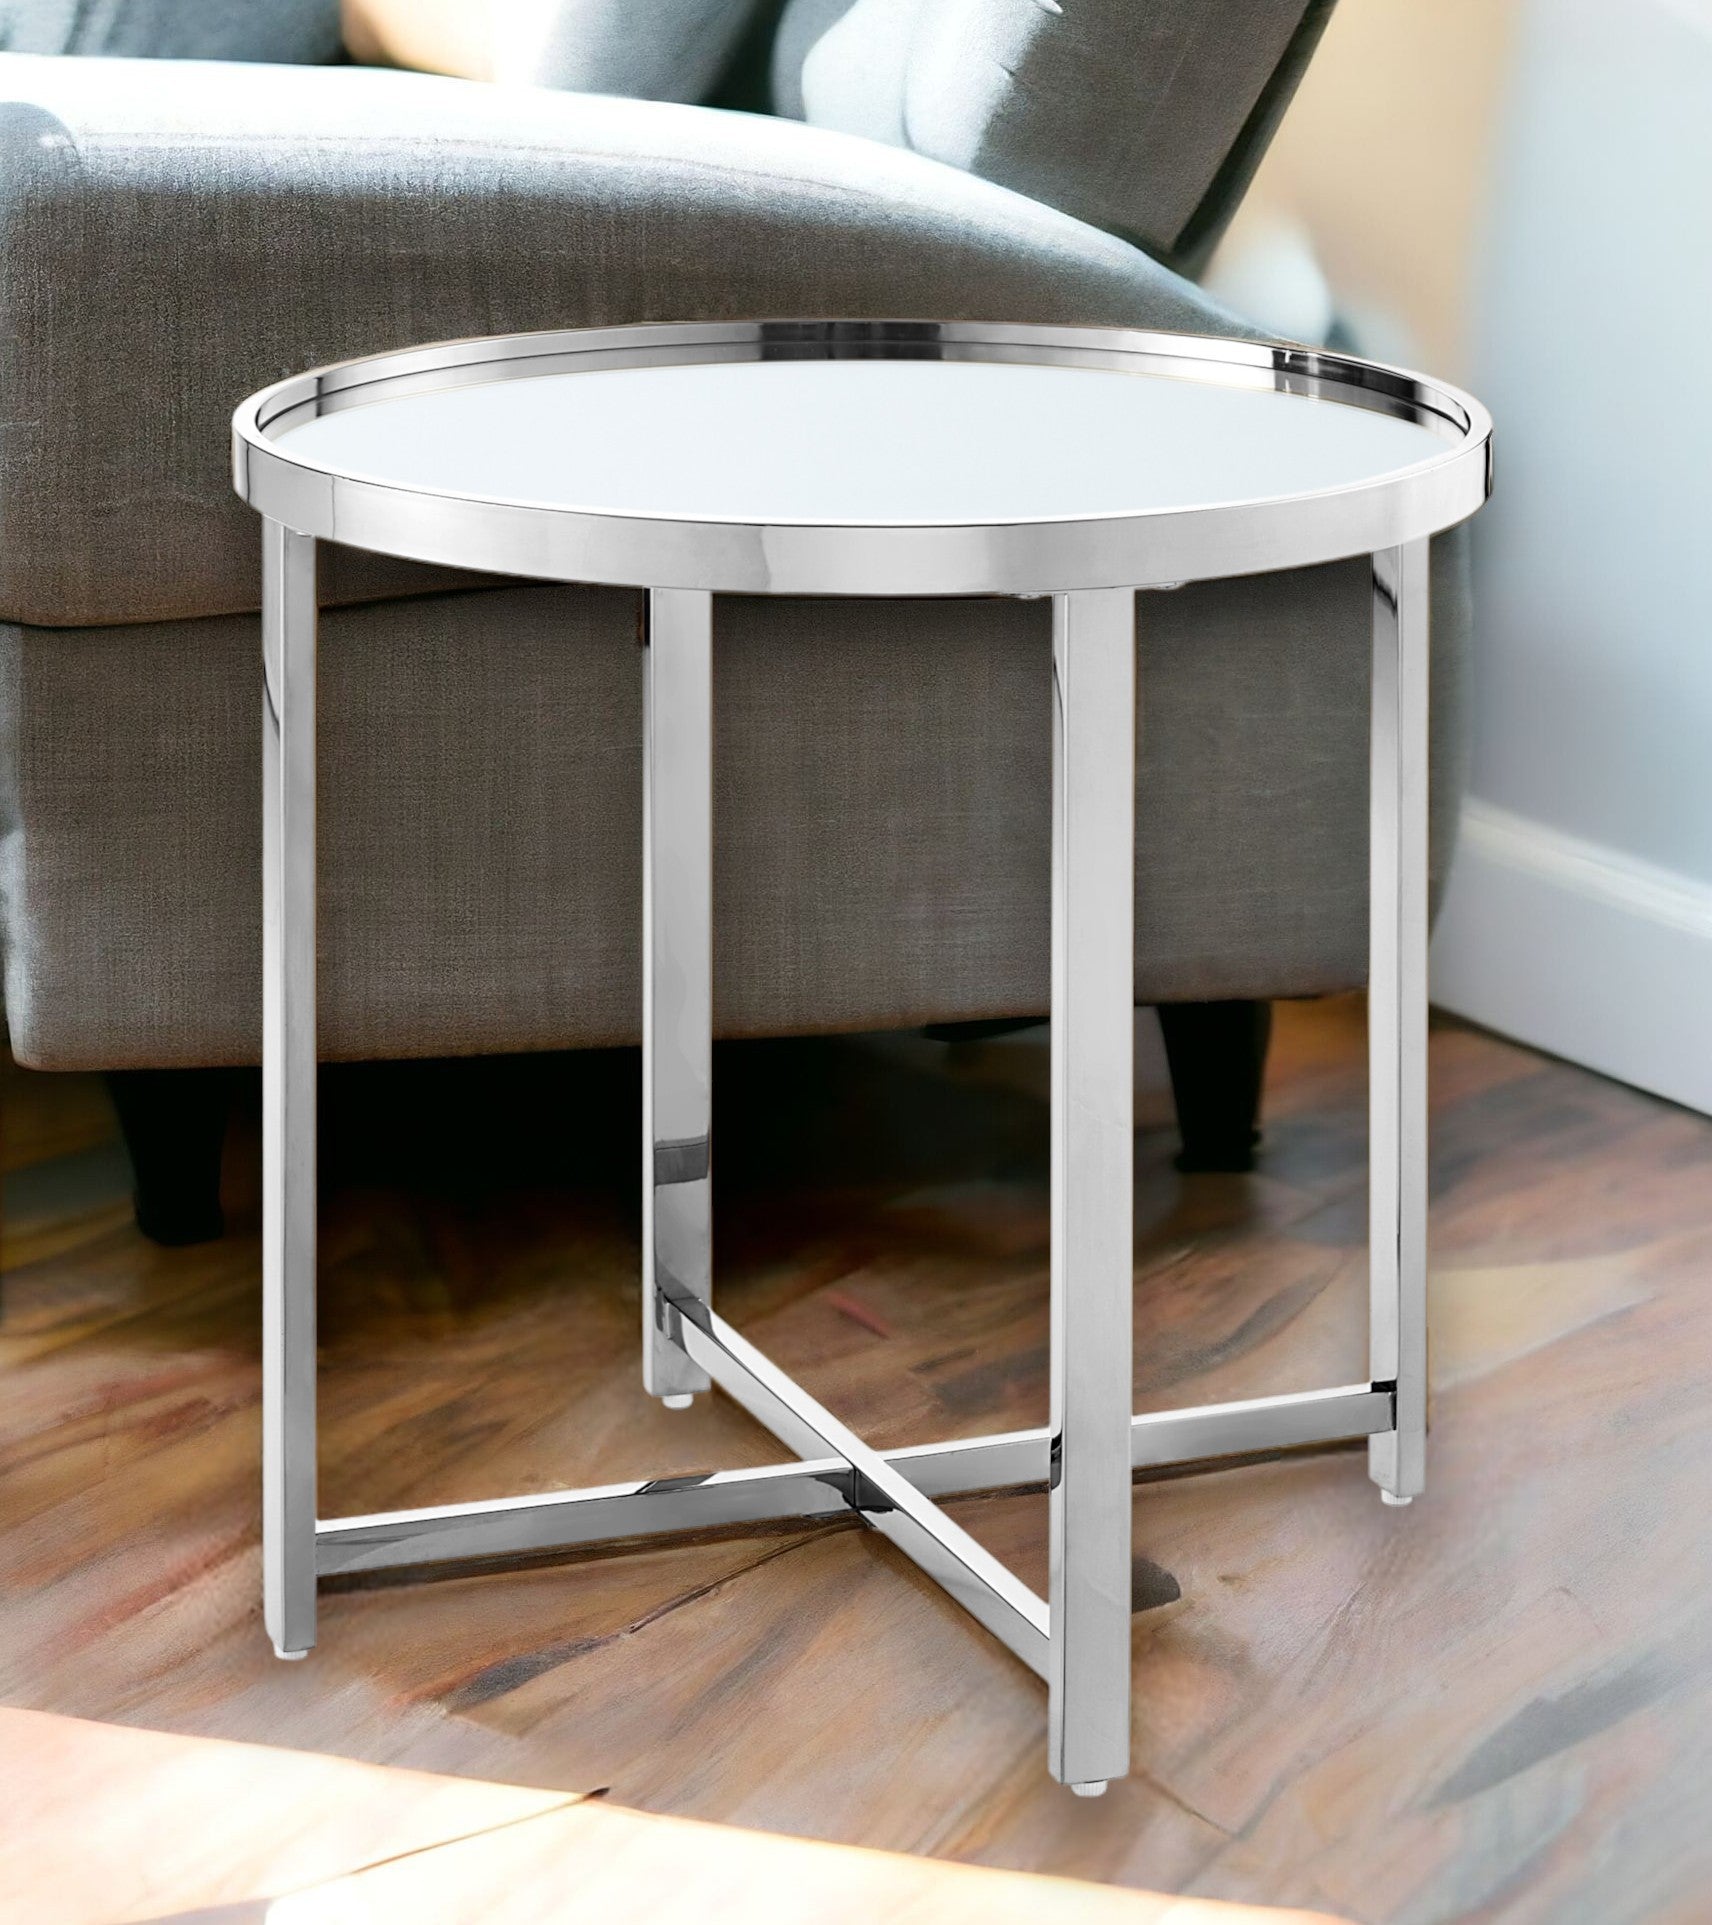 22" Silver Glass Round Mirrored End Table